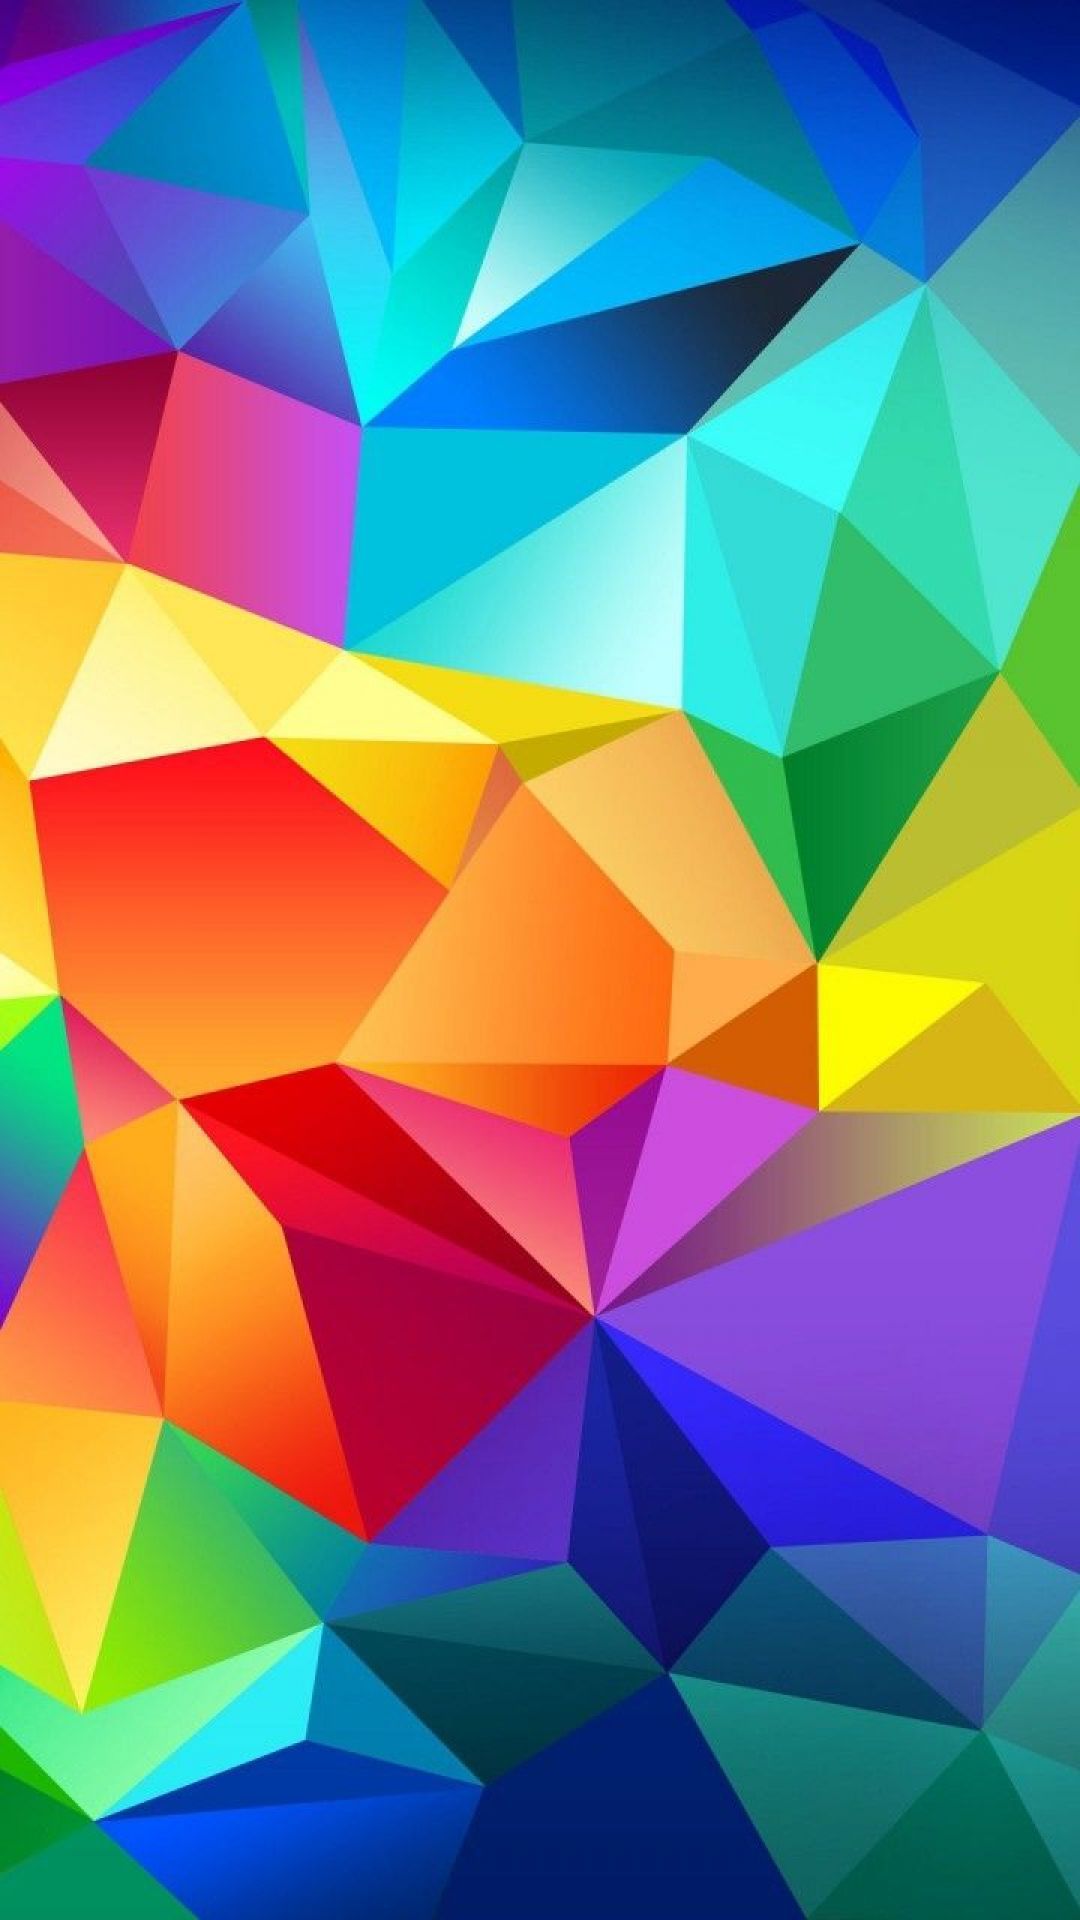 Geometric Shapes HD Wallpaper (Desktop Background / Android / iPhone) (1080p, 4k) (1080x1920) (2021)